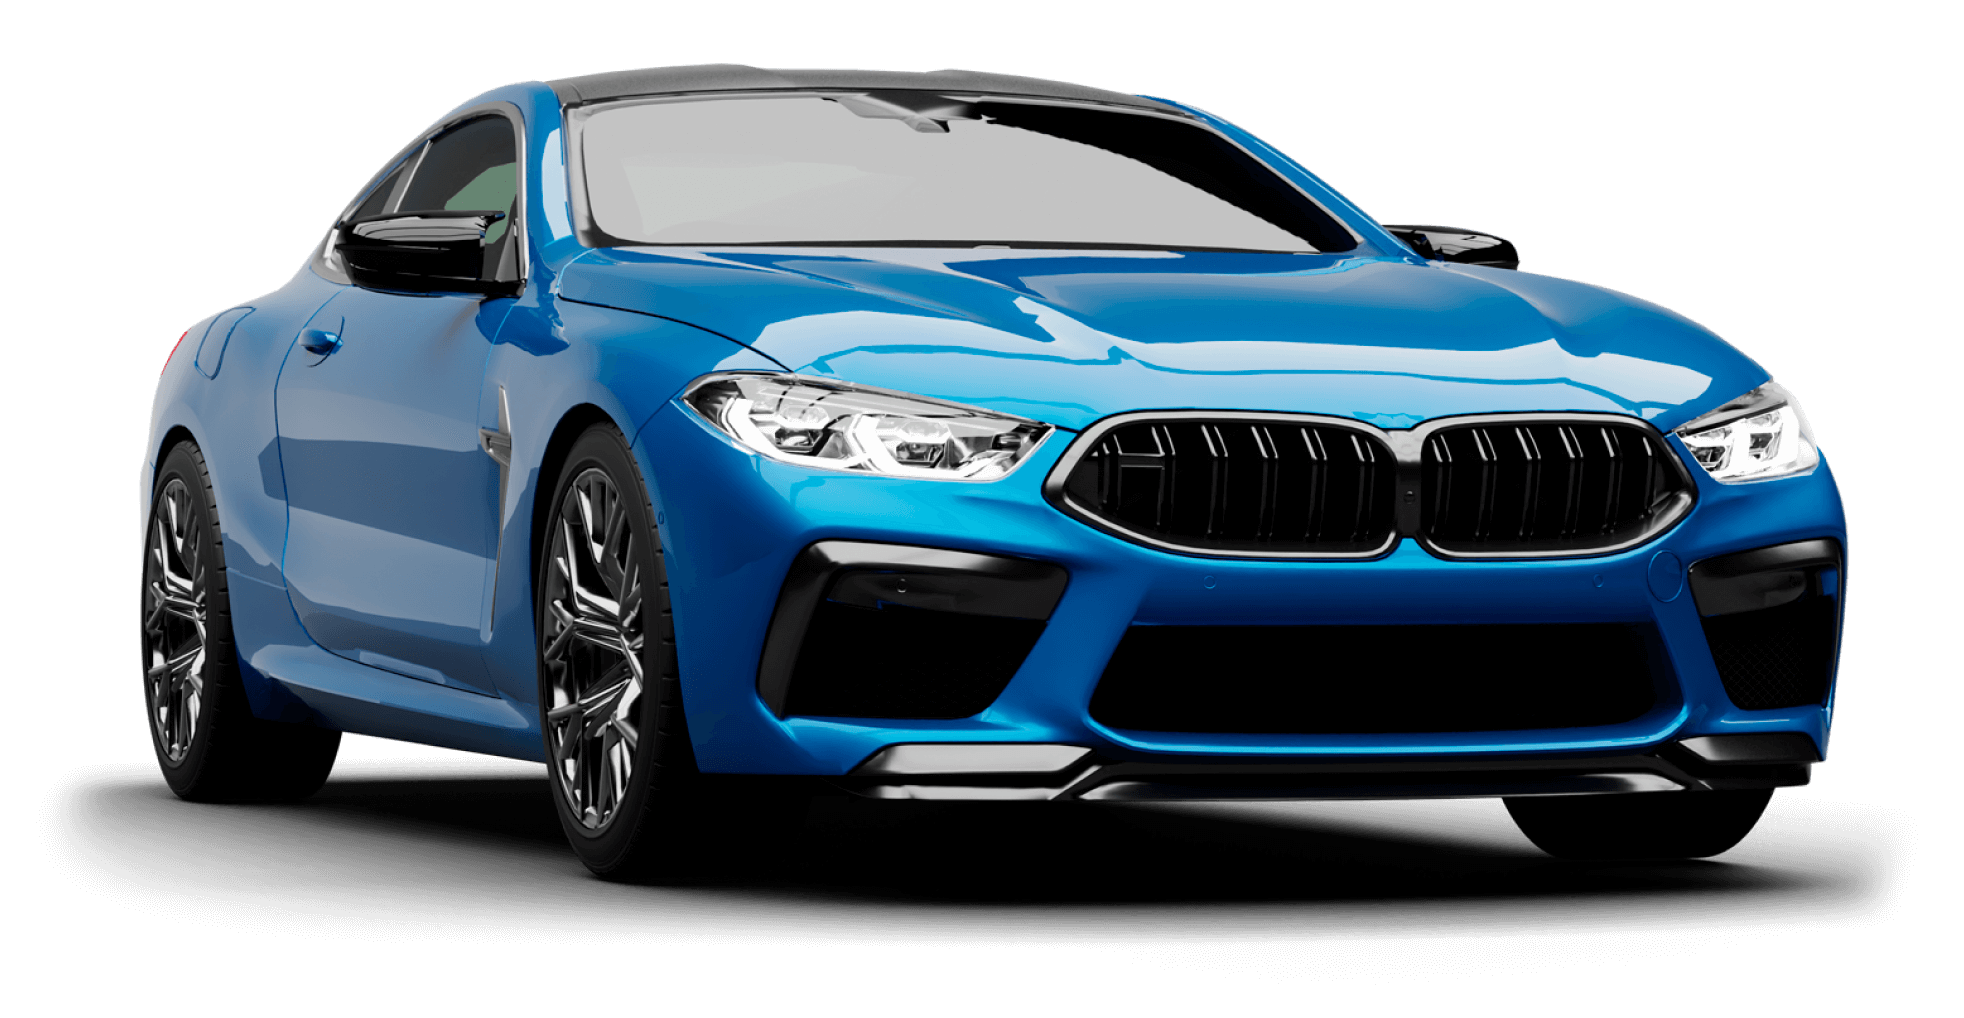 291_isolated_realistic_metallic_blue_modern_elegant_super_sport_car_from_left_front_angle_view-1-2